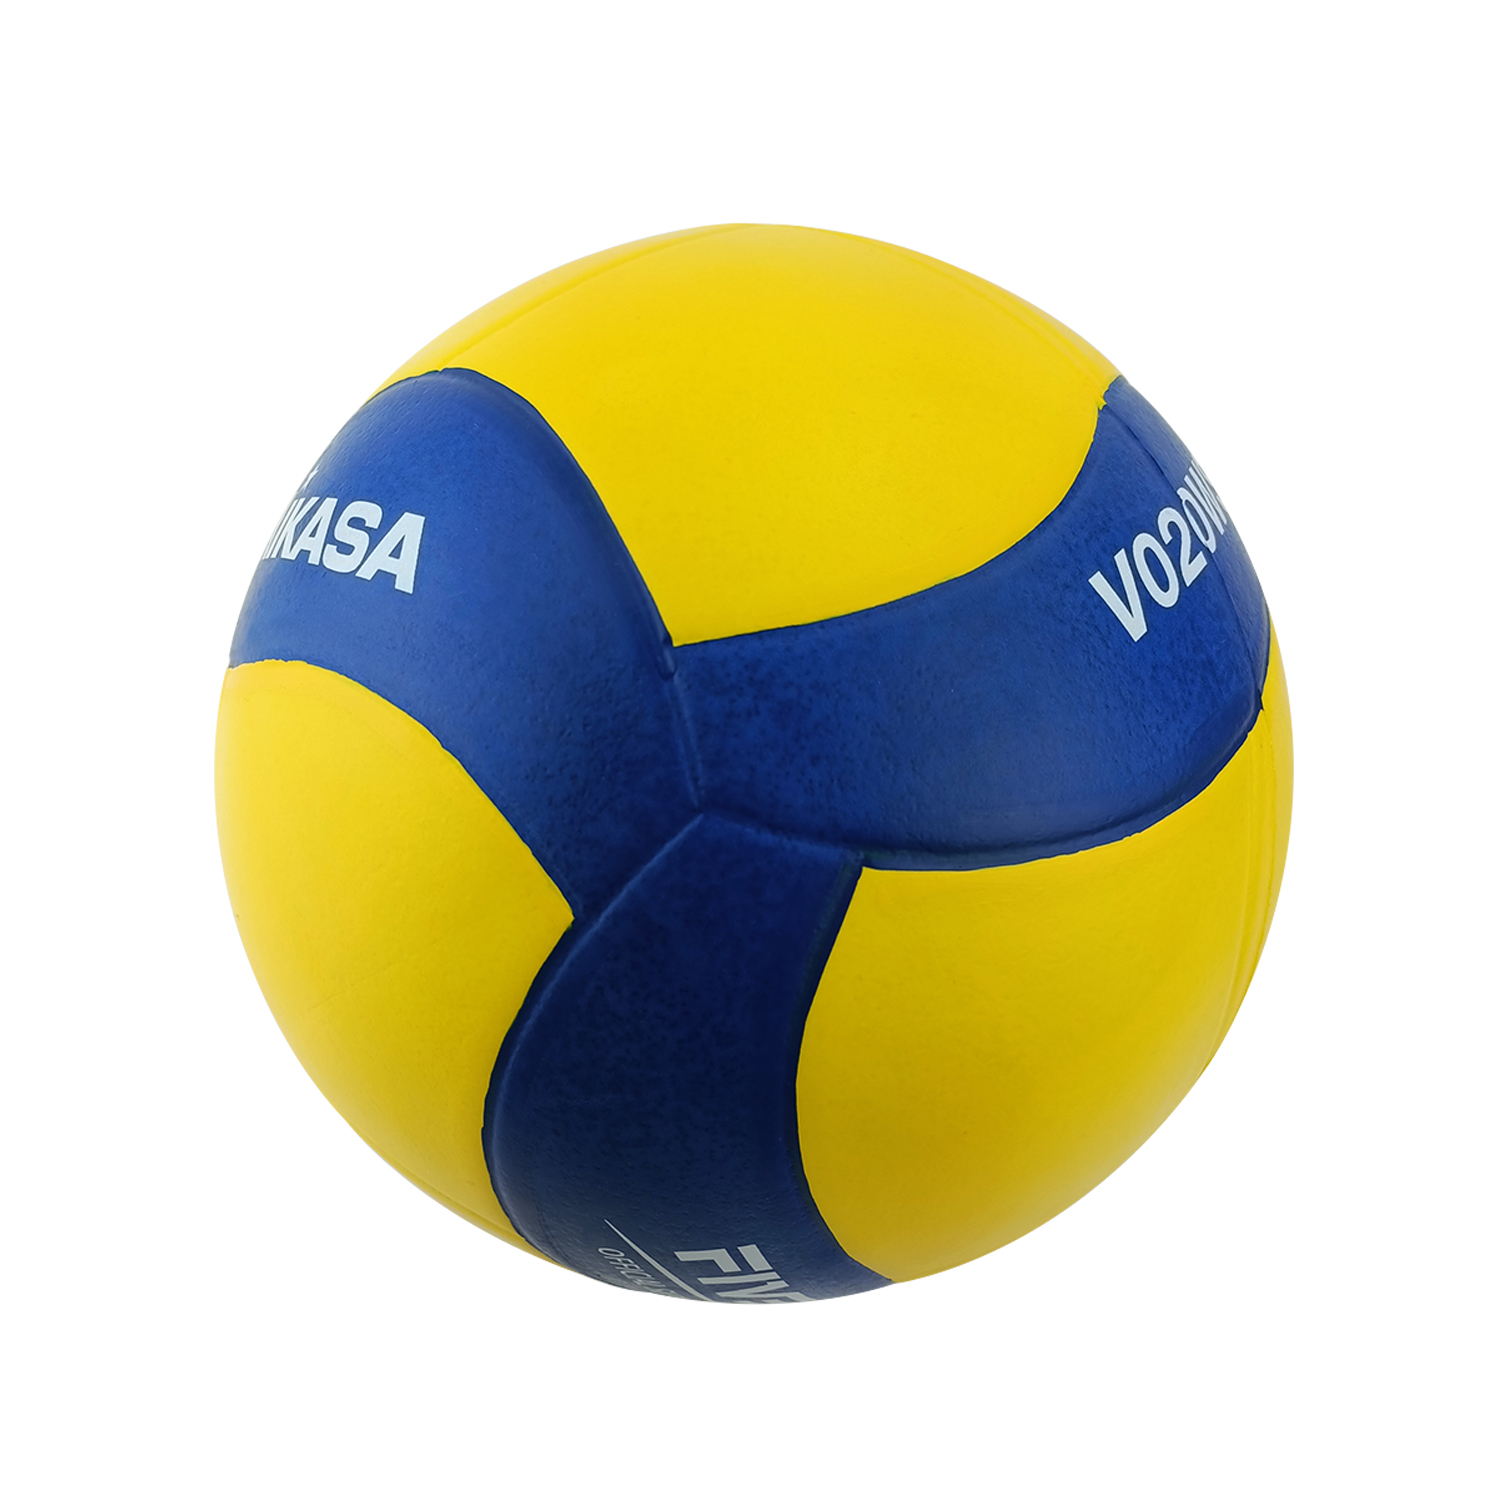 MIKASA V020WS VW SERIES VOLLEYBALL RUBBER SIZE 5, , large image number null